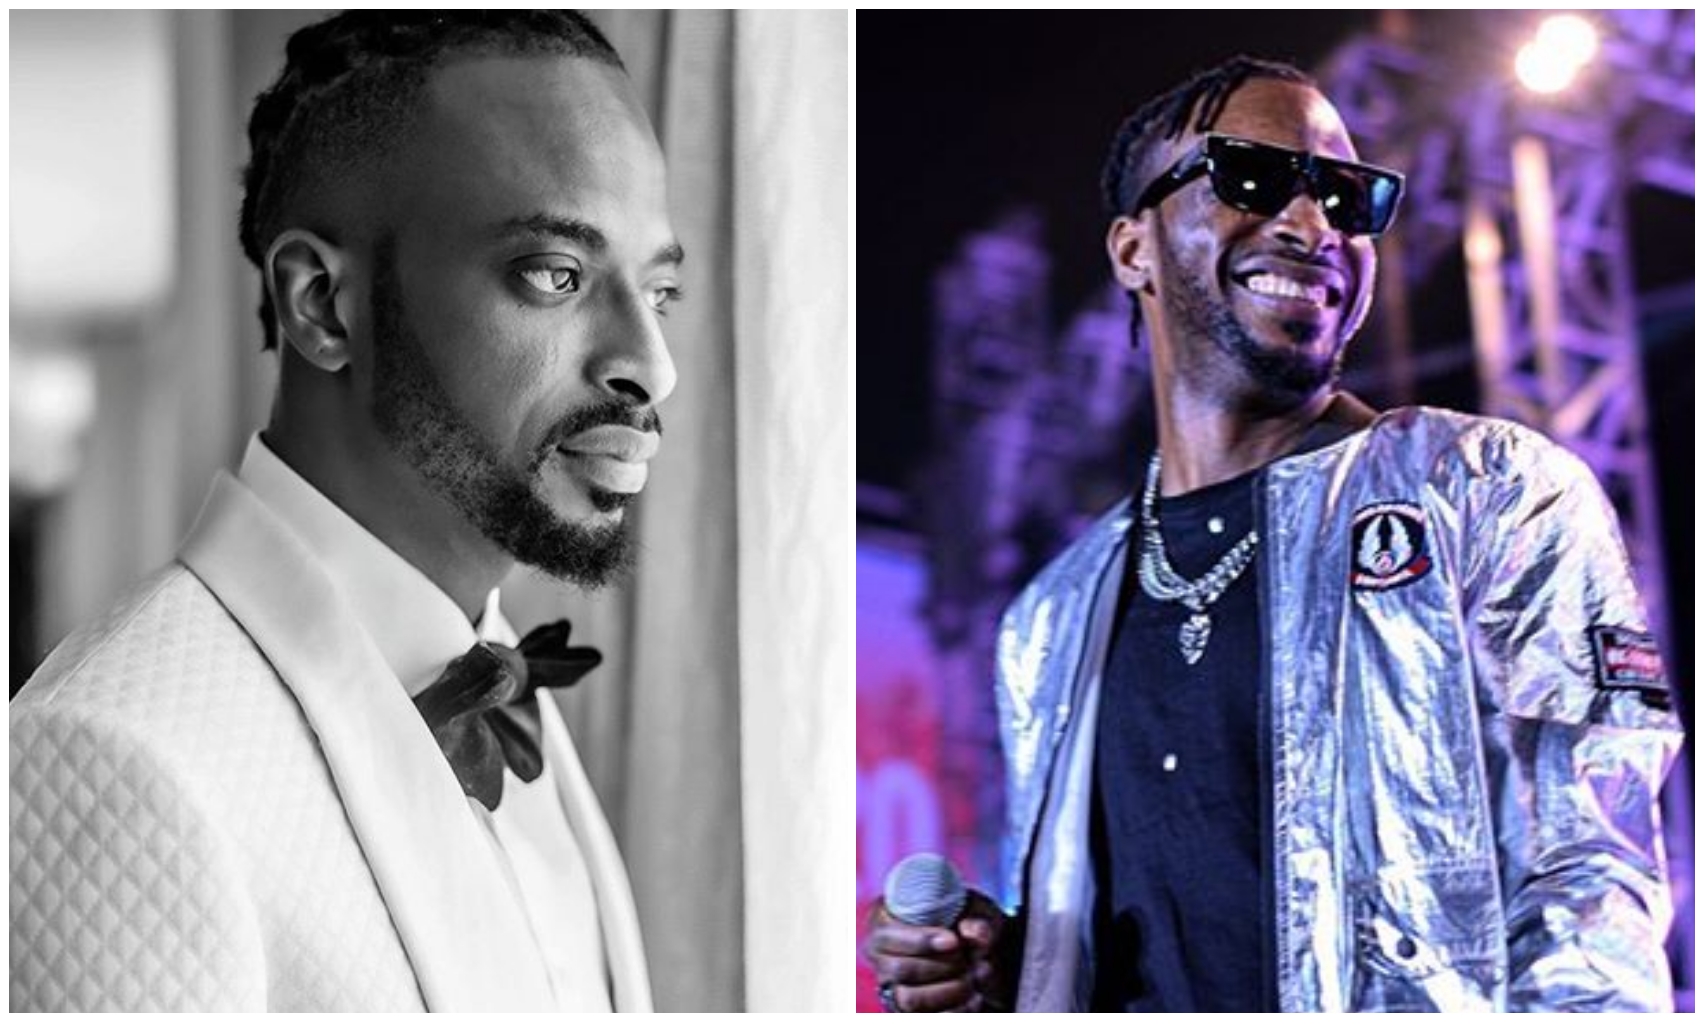 'I promised myself Grammy Award, not the fans" – 9ice opens up on failed ambition